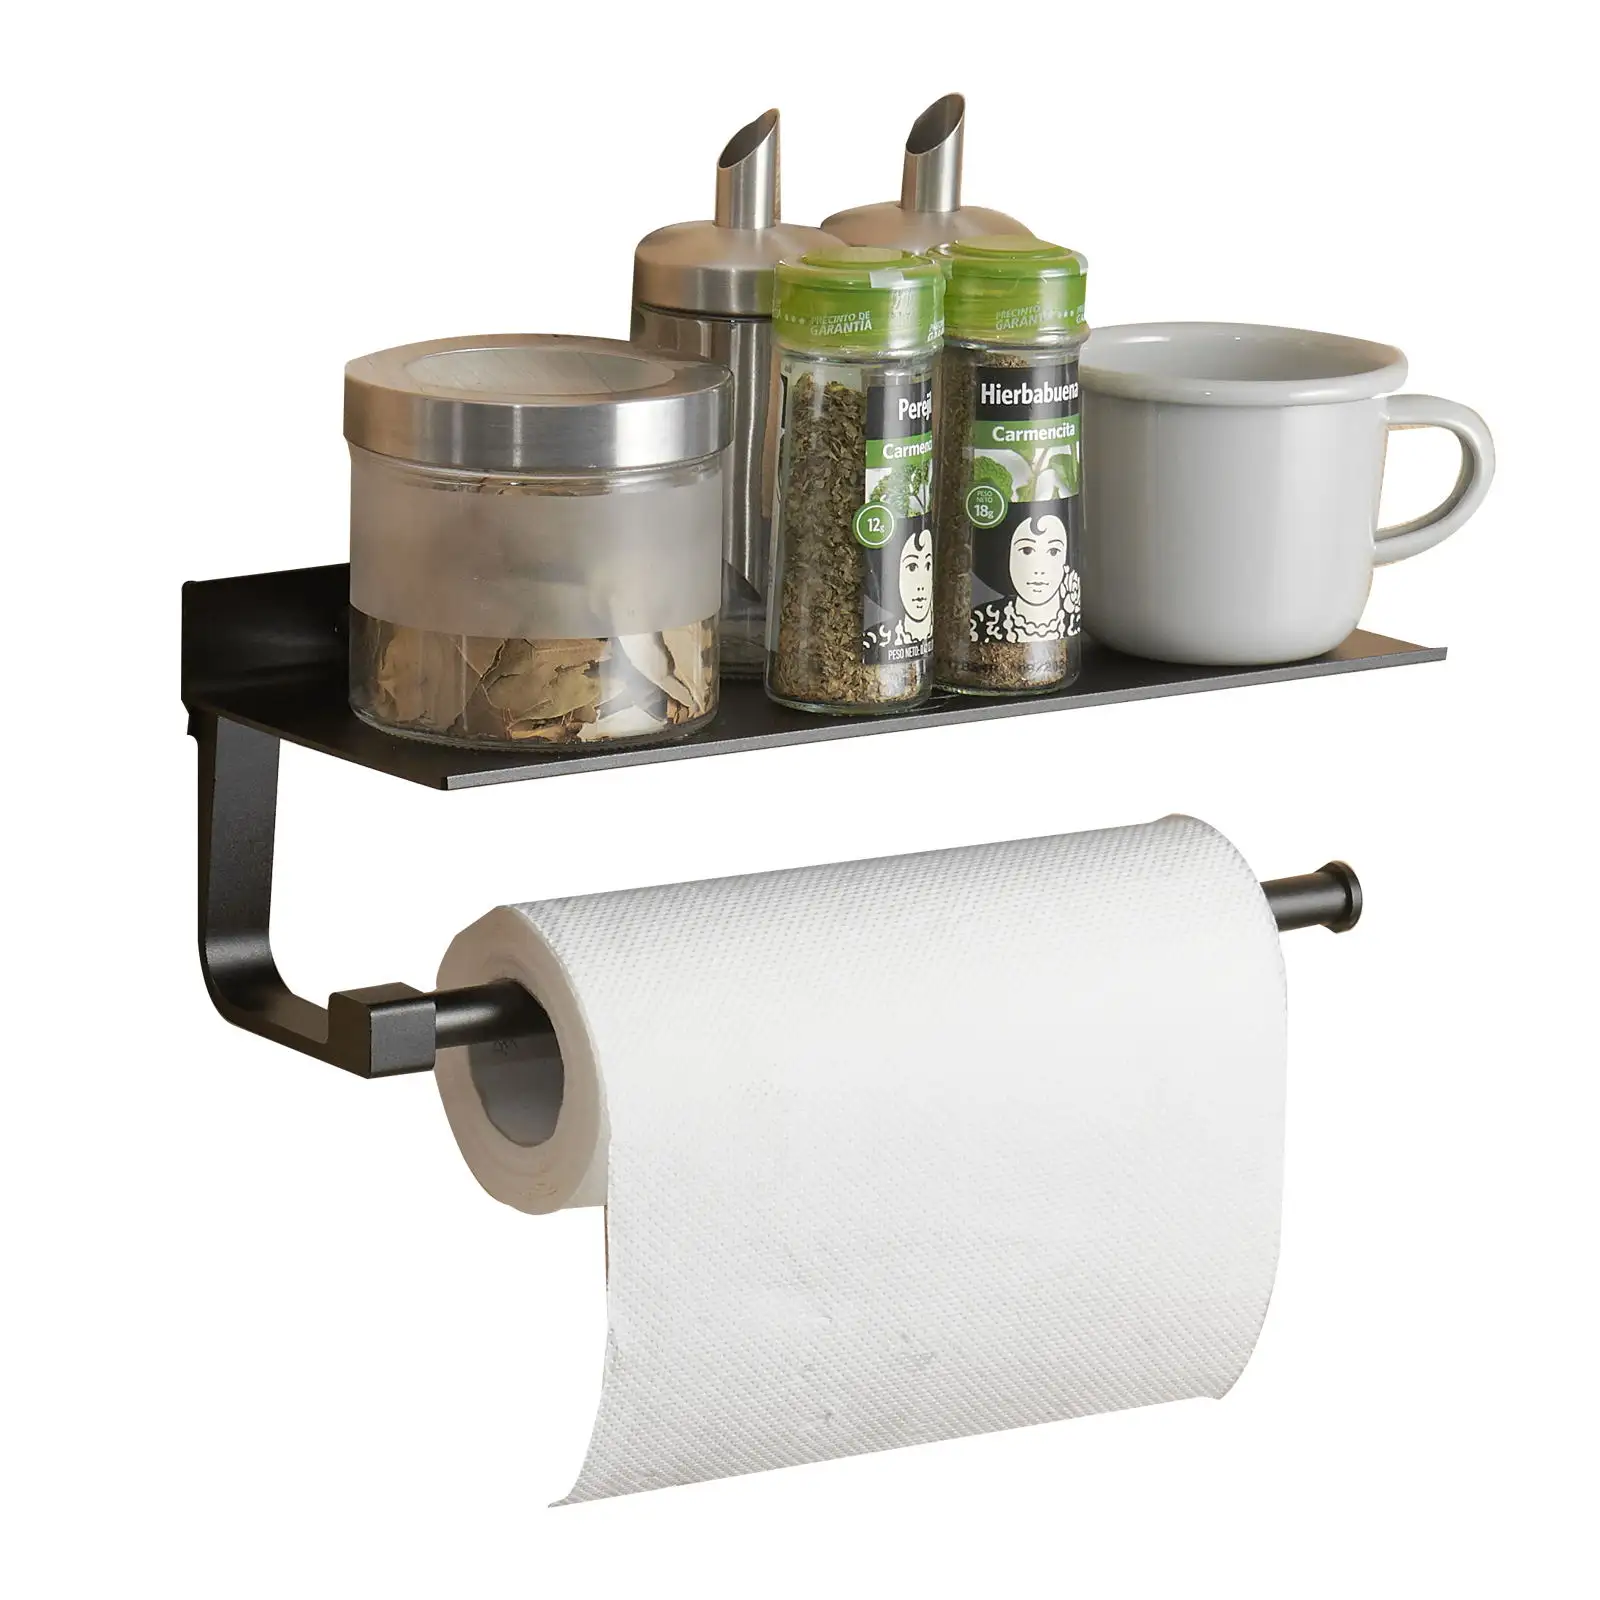 Adhesive Paper Towel Holder Wall Mounted Kitchen Bathroom Tissue Roll Hanger with Storage Shelf Space Aluminum